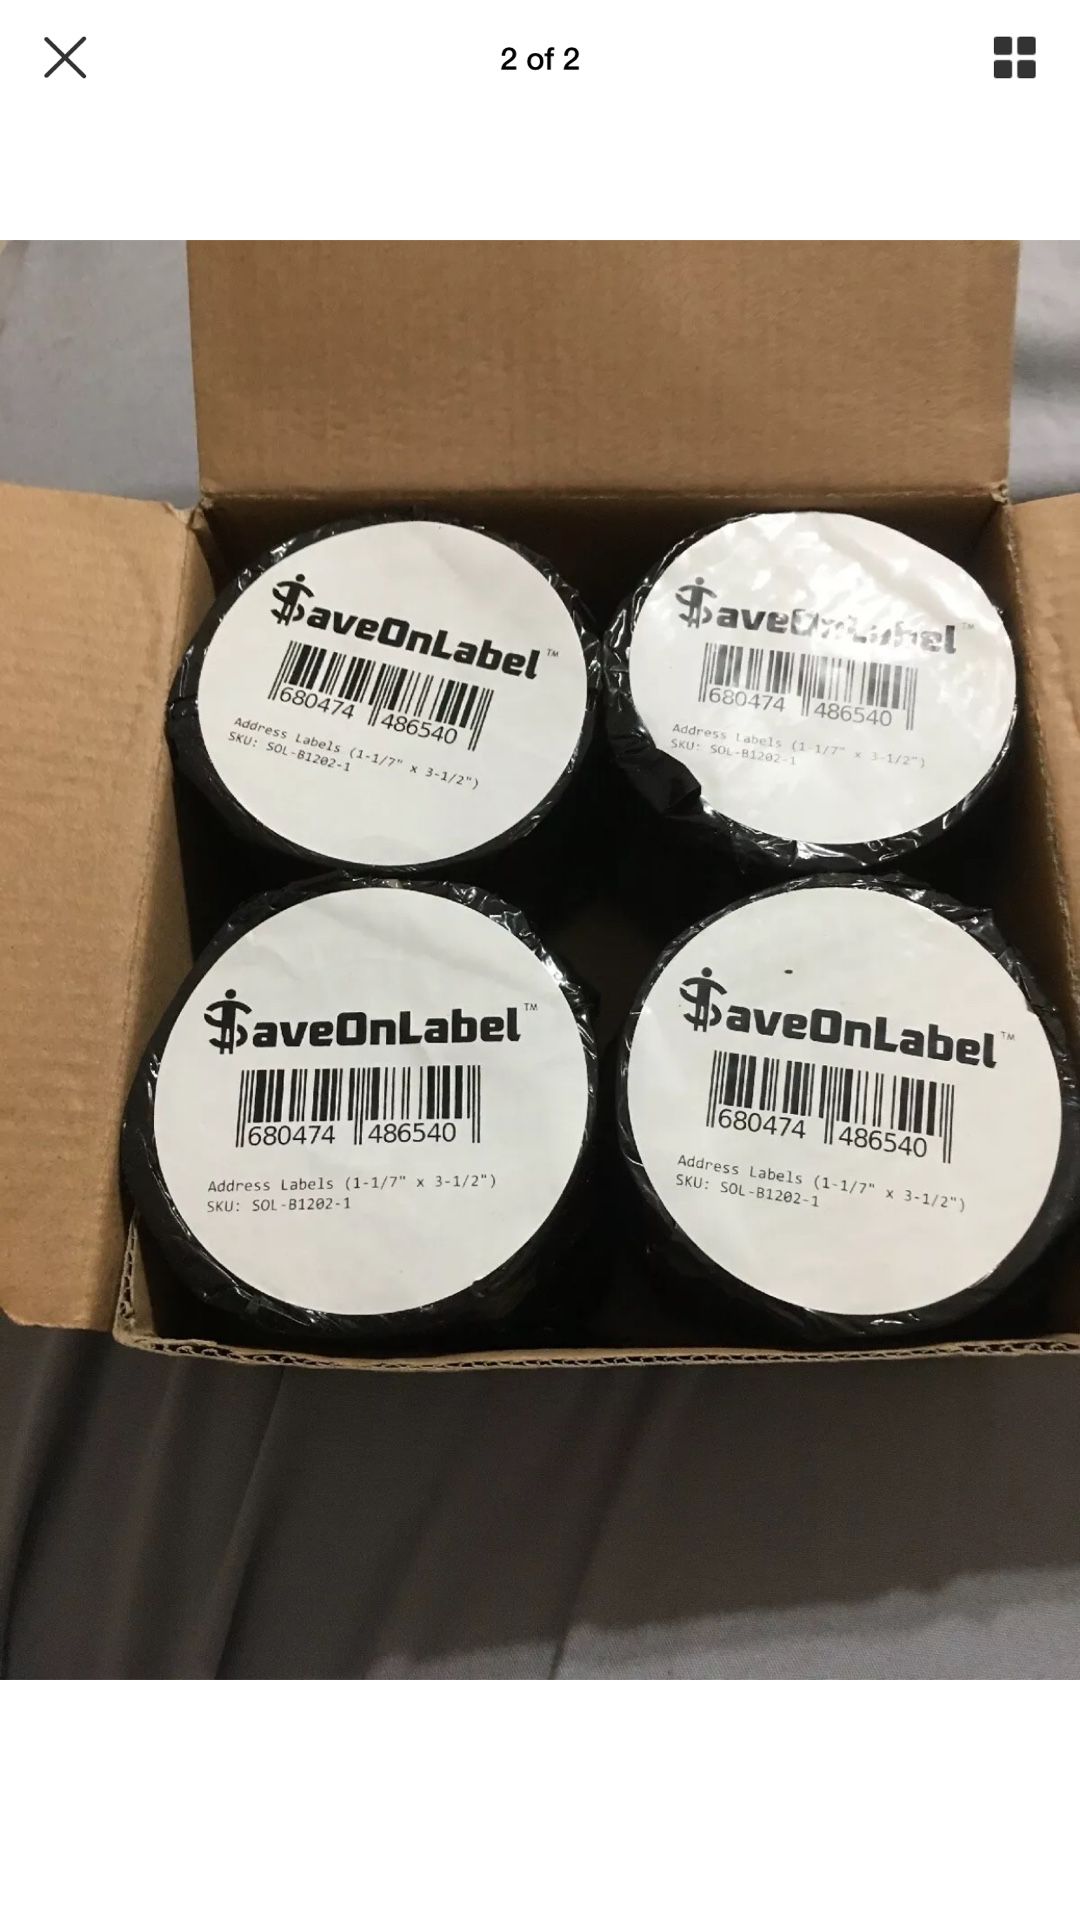 SaveOnLabel 1 1/7” X 3 1/2” Shipping Labels For Thermal Printers 4 Roll Box.